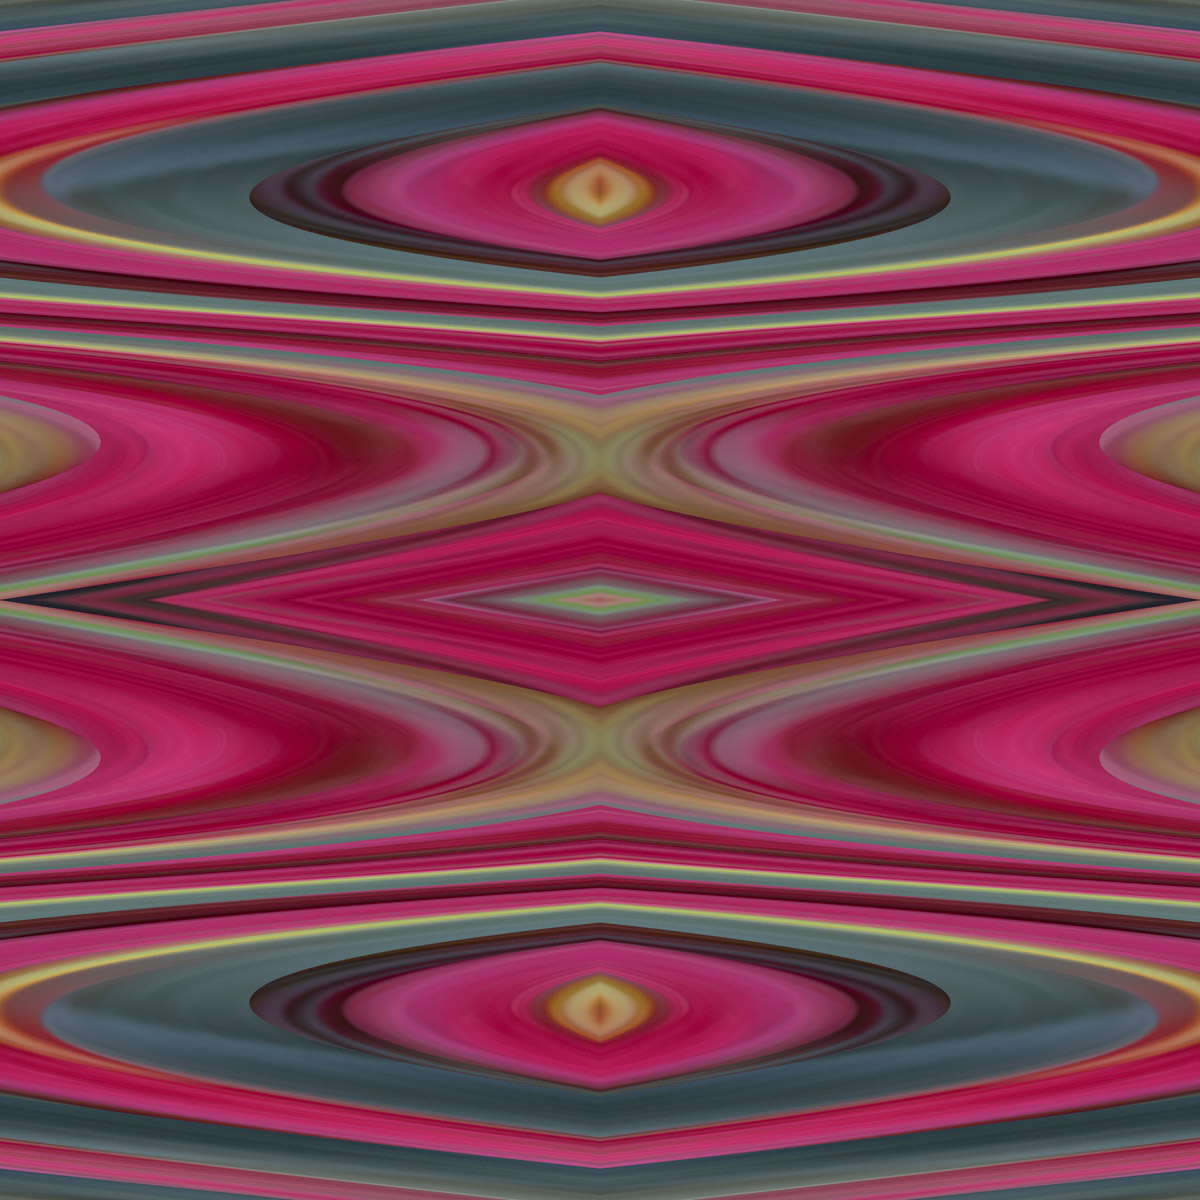 A colorful abstract image of pink, green and brown.